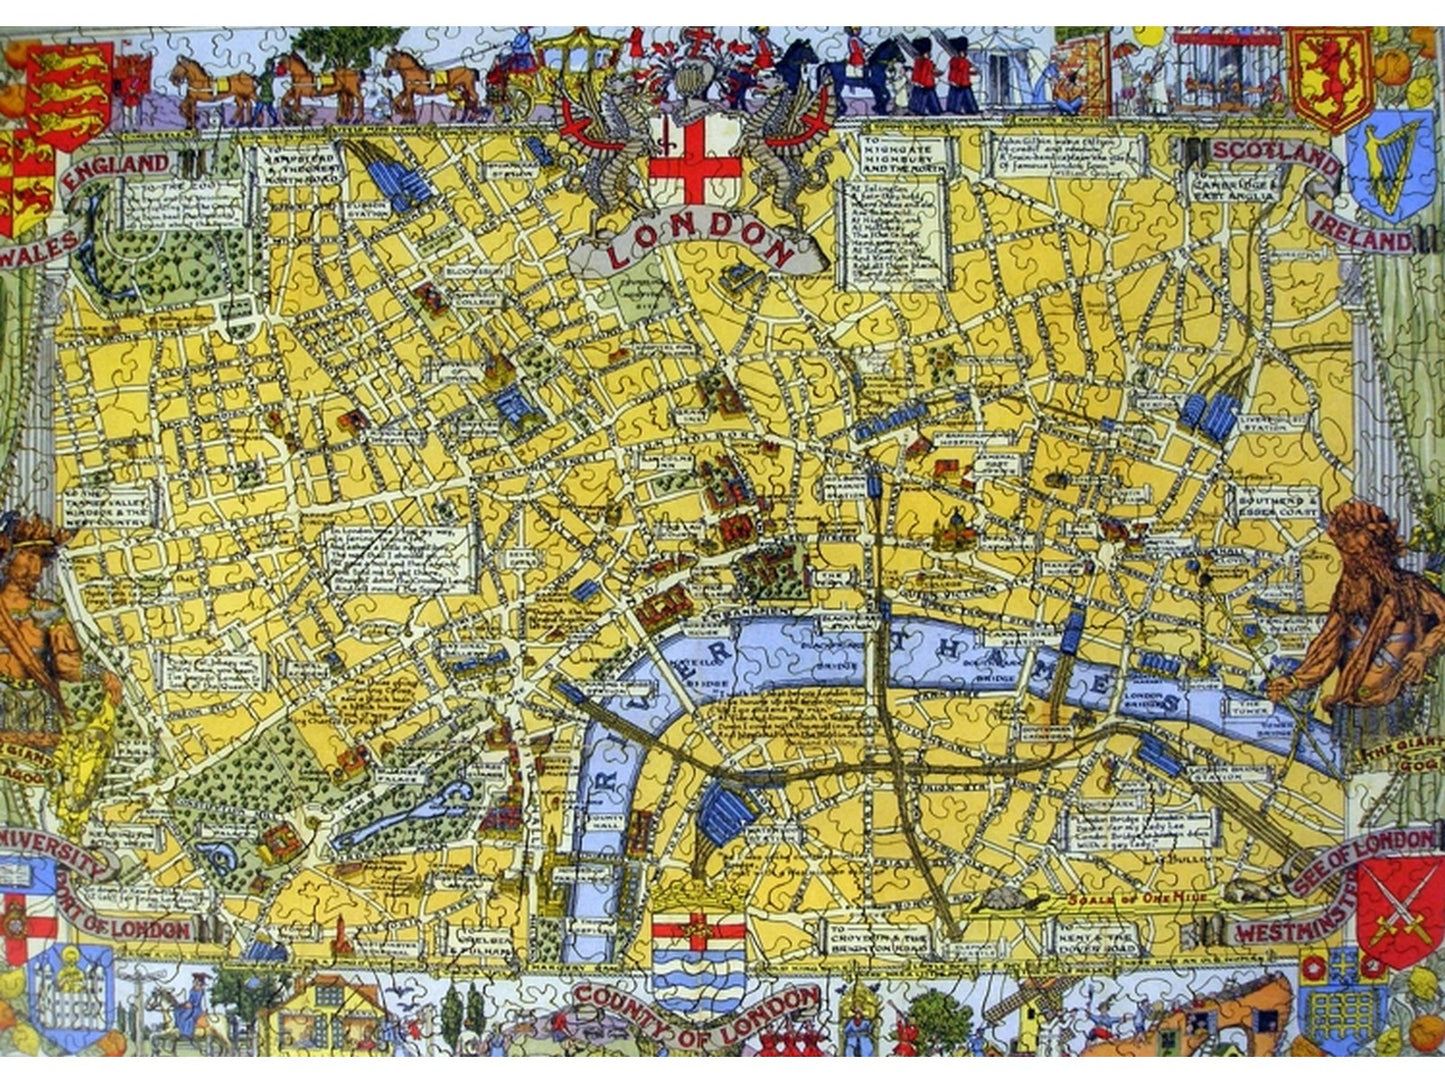 The front of the puzzle, Map of London, which shows a vintage map of London with a decorative border.